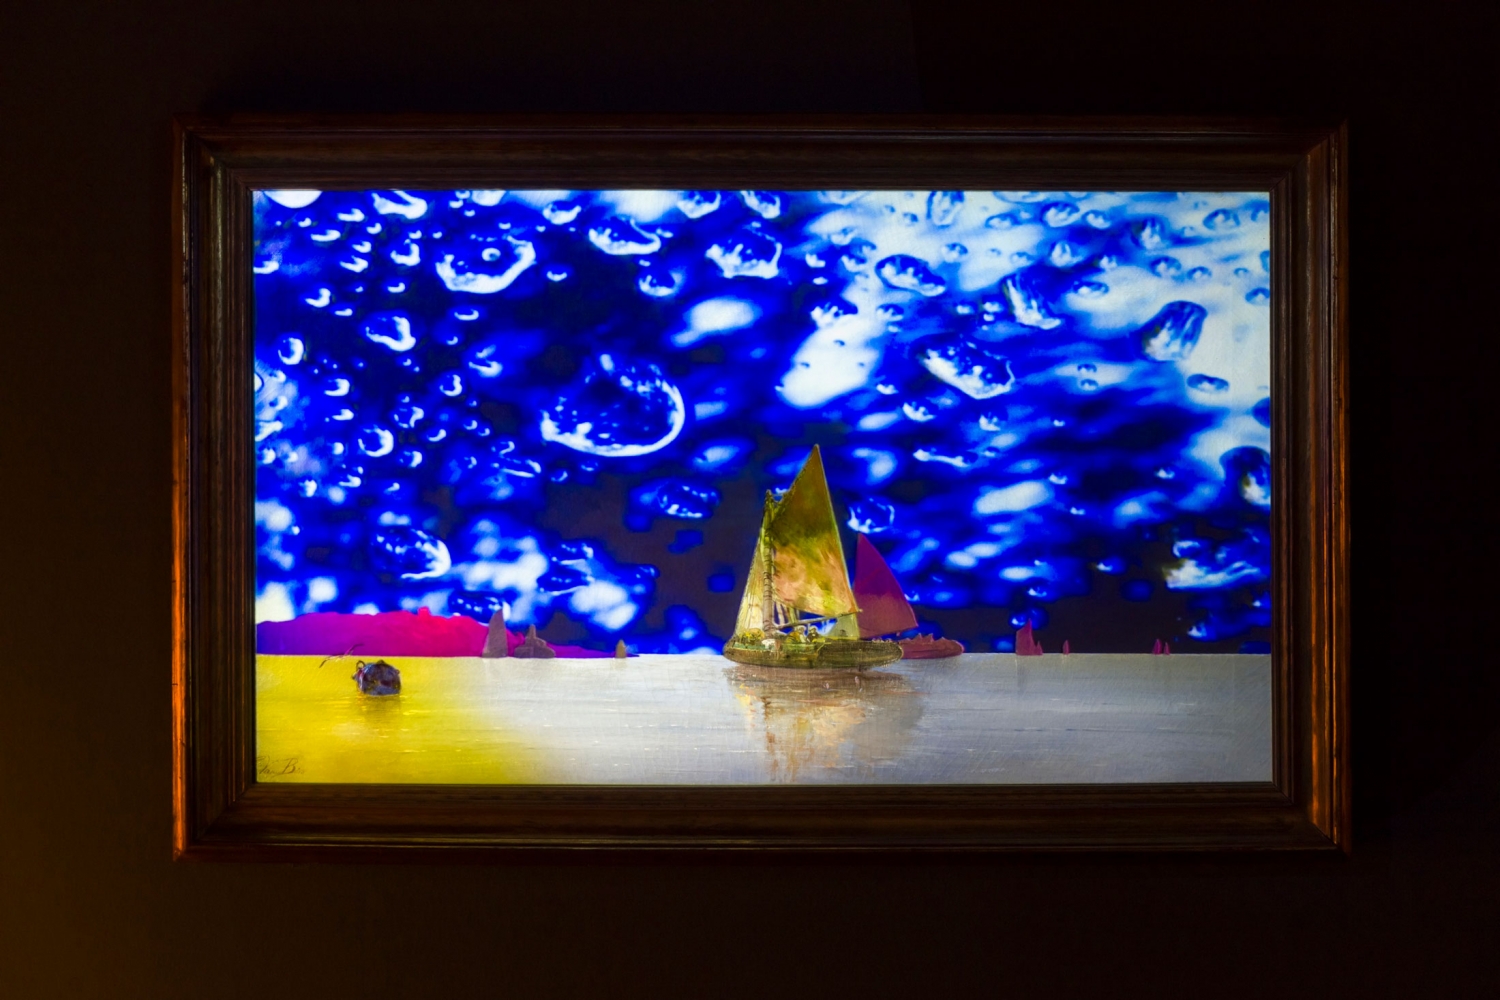 Pipilotti Rist
Komm bald wieder [Come Again Soon], 2016
Oil painting, projector, media player
24 7/16 x 38 5/8 x 1 3/4 inches
(62.2 x 98.2 x 4.5 cm)